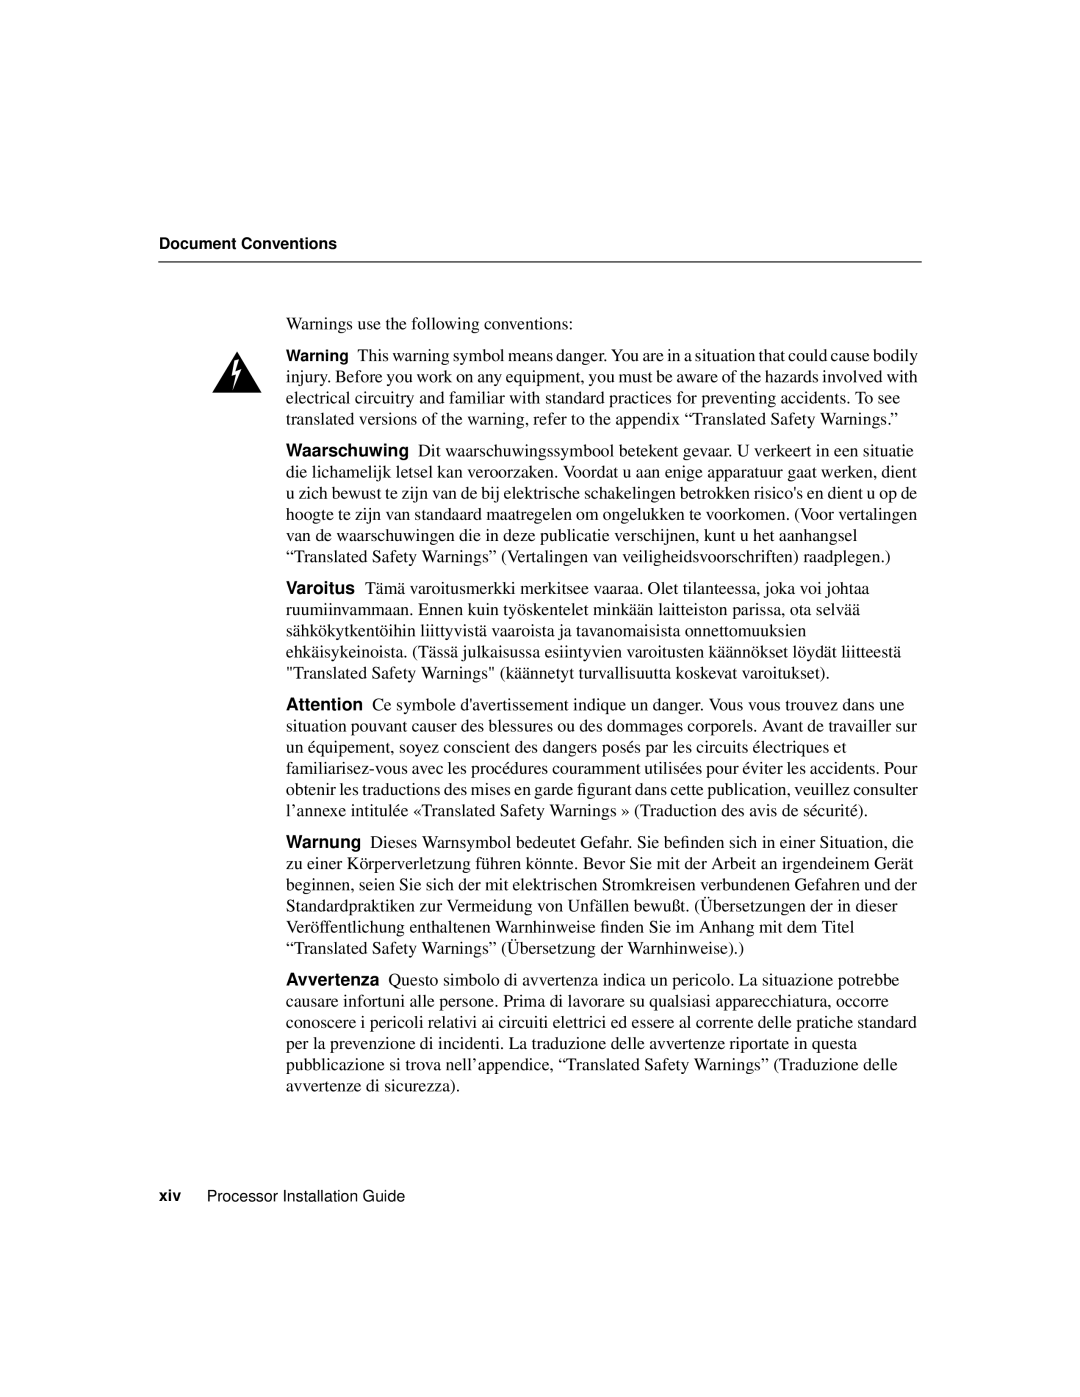 Cisco Systems Computer Accessories manual Warnings use the following conventions 